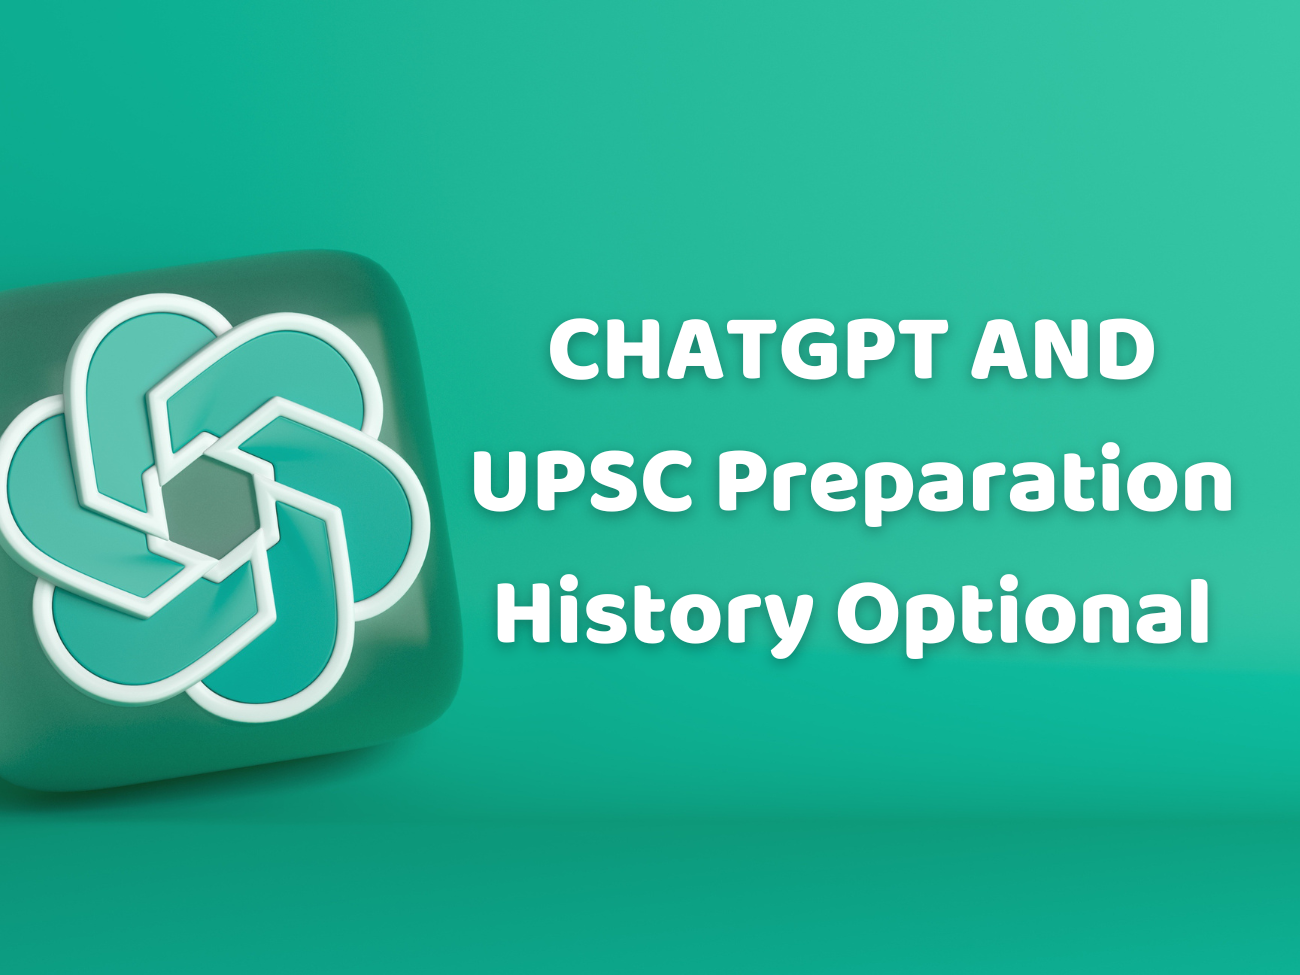 ChatGPT and UPSC I Prepare for History for IAS Mains ChatGpt prompts.